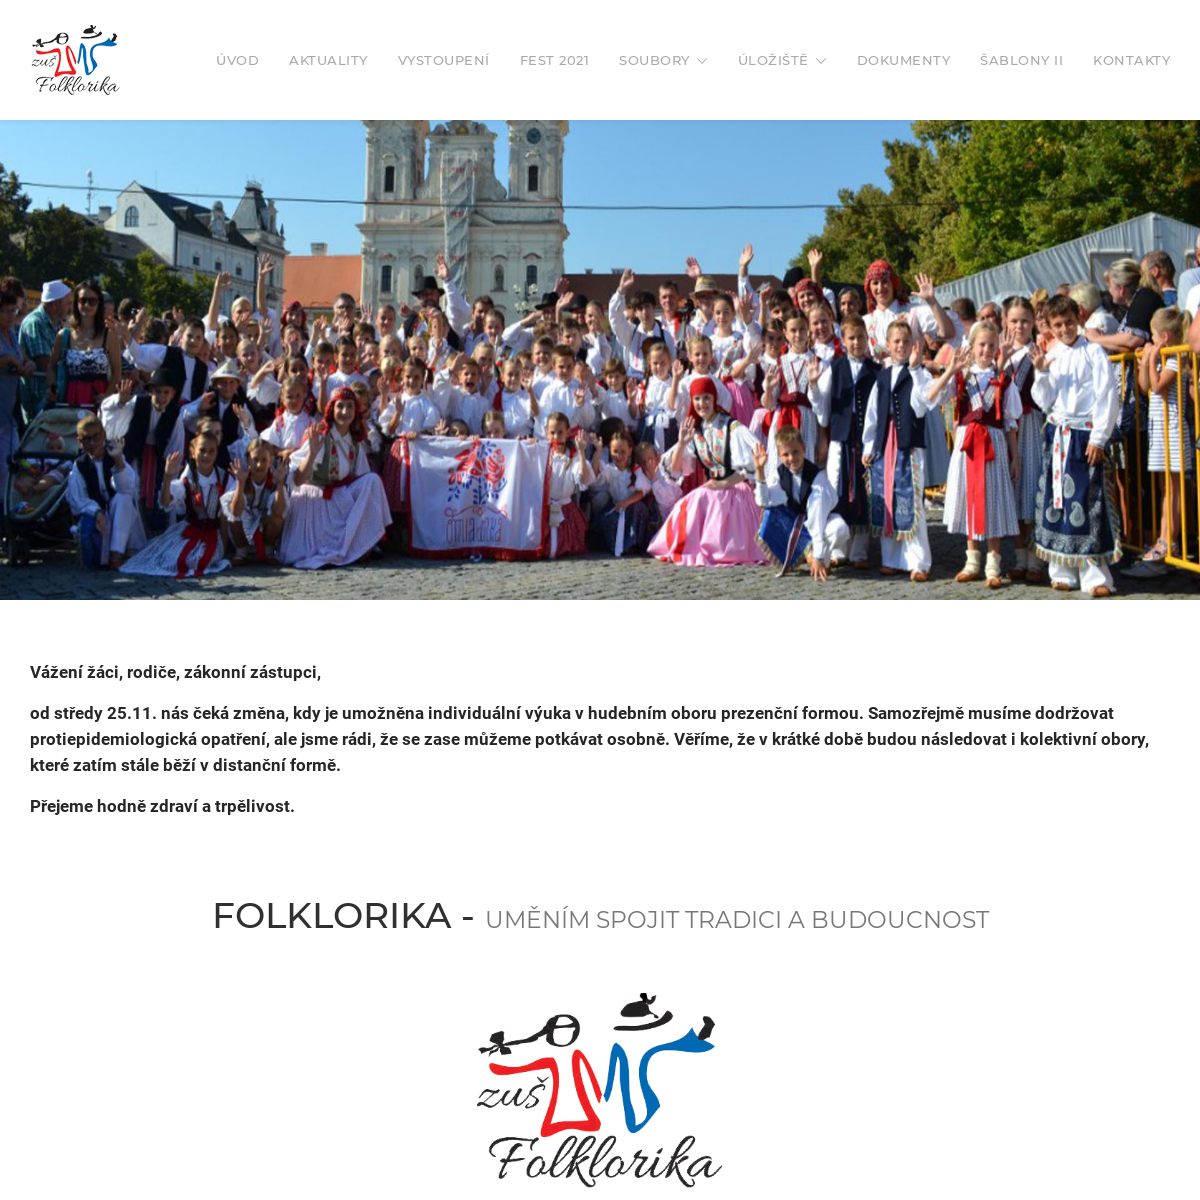 A complete backup of zusfolklorika.cz